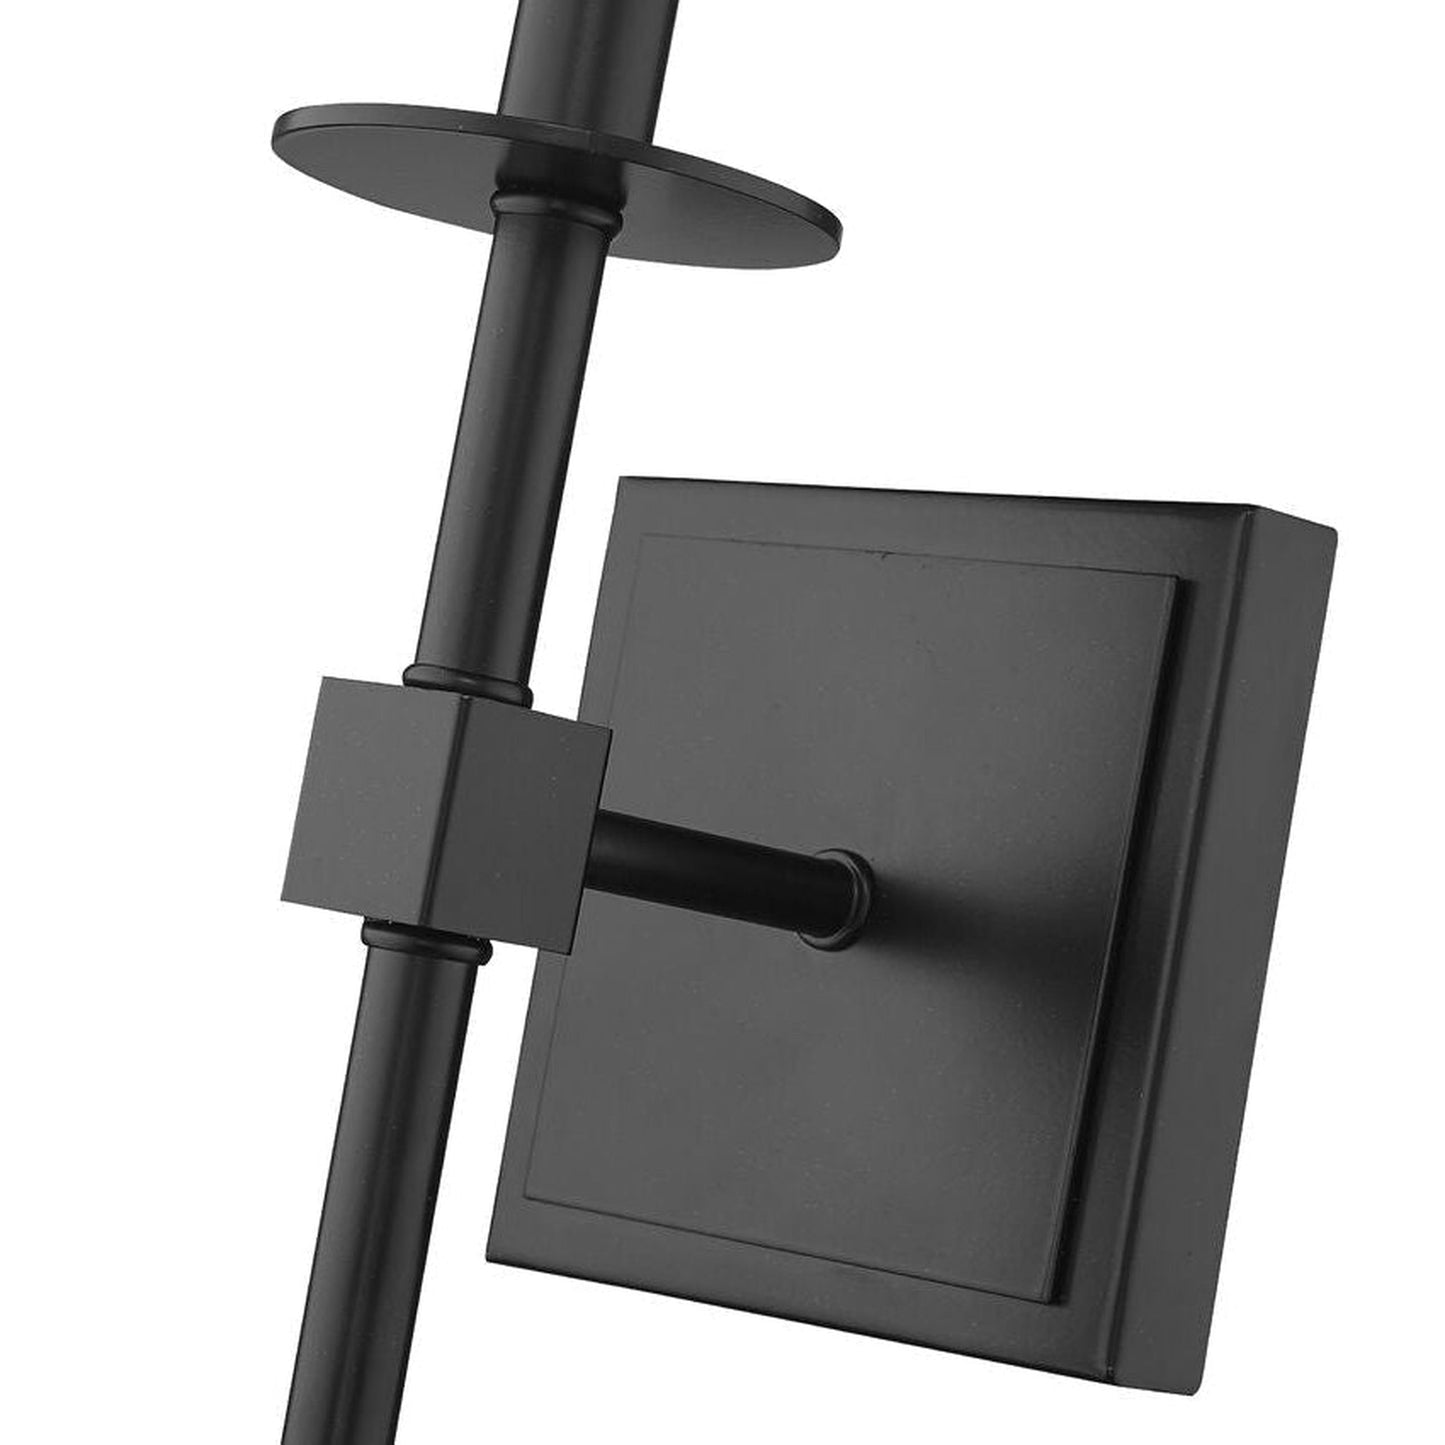 Z-Lite Camila 6" 1-Light Matte Black Wall Sconce With White Fabric Shade